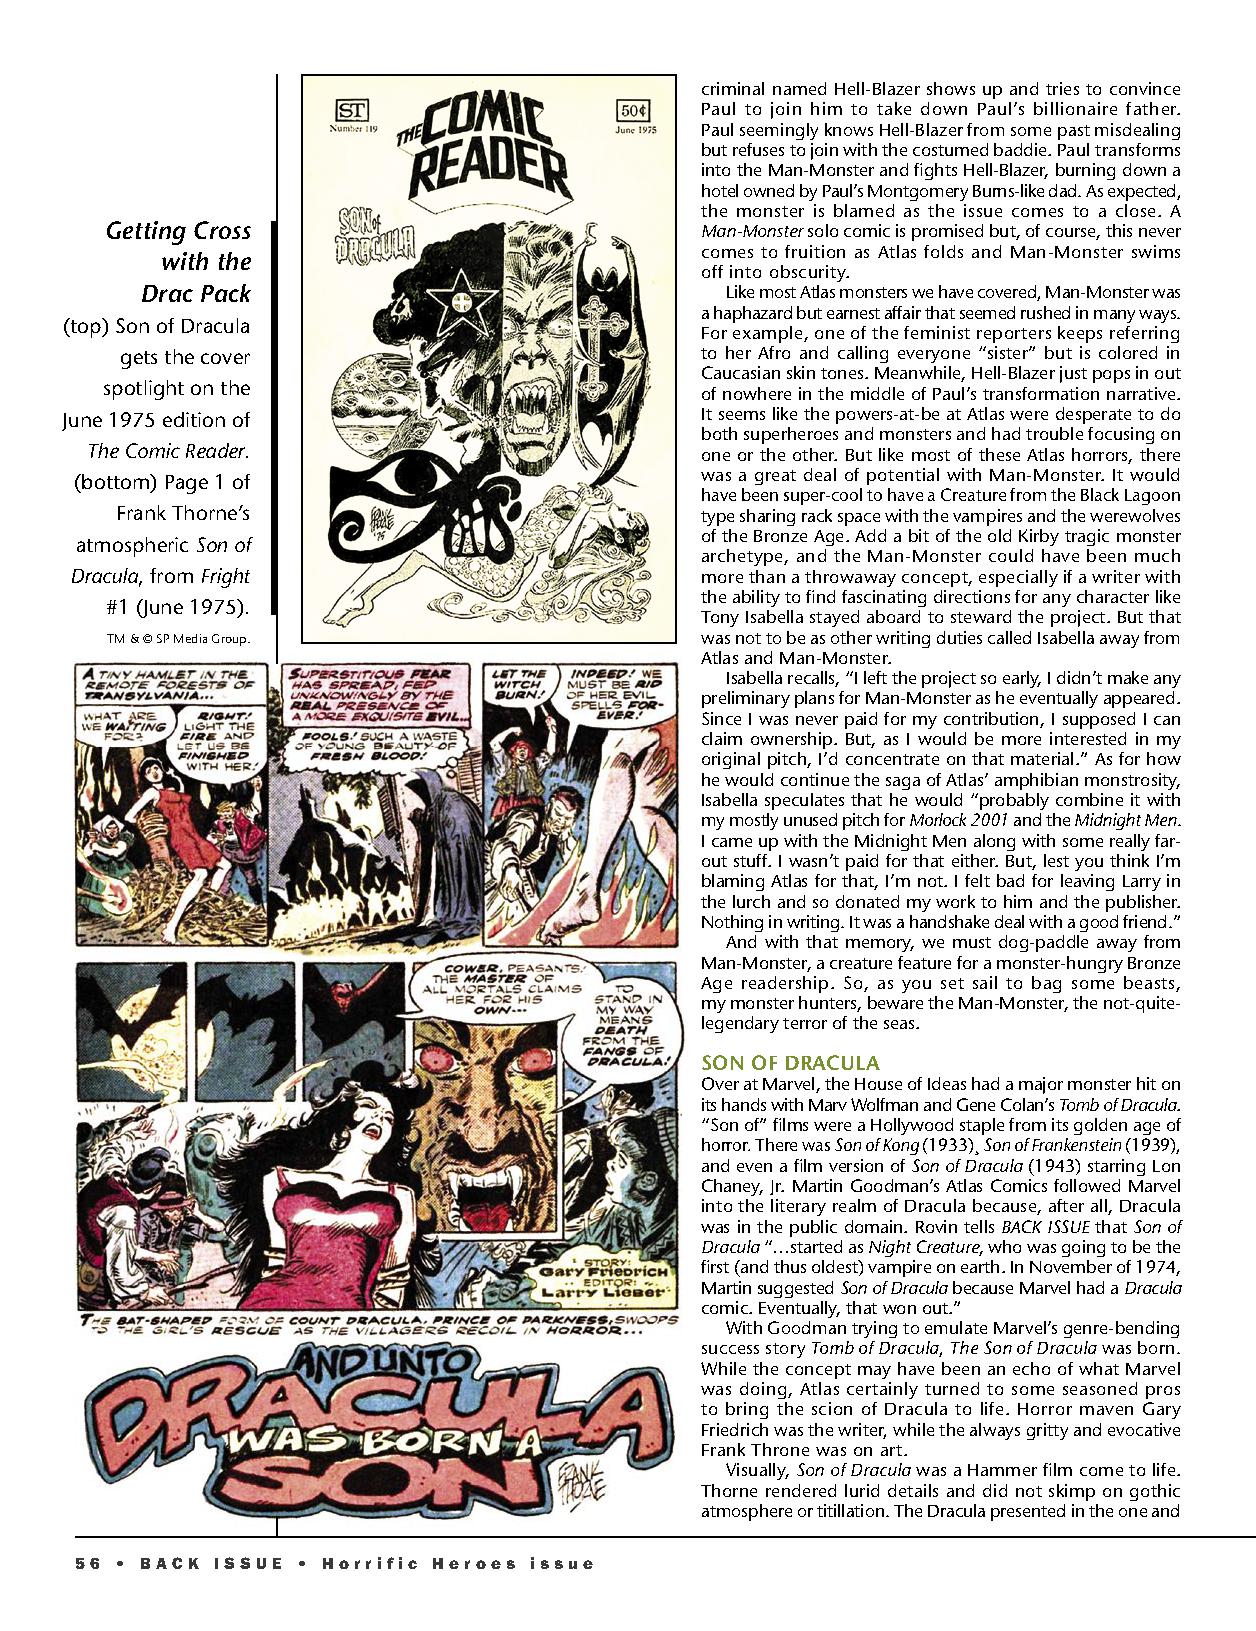 Read online Back Issue comic -  Issue #124 - 58